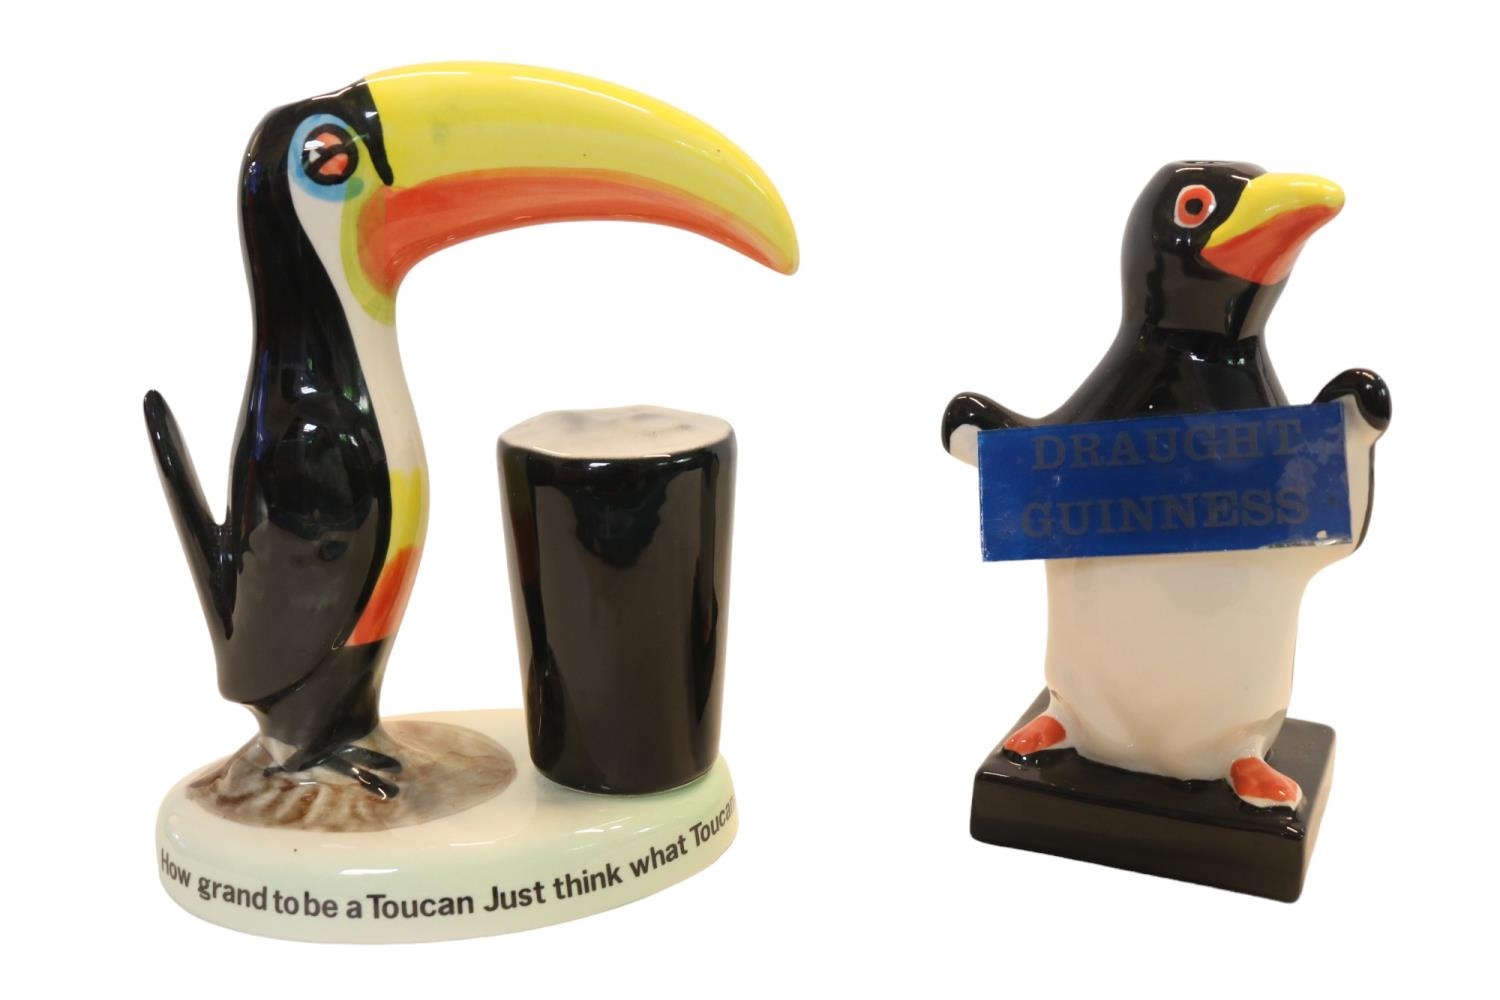 Draught Guinness Carlton Ware Lamp base and a Guinness Toucan Lamp base 18cm & 'How grand to be a